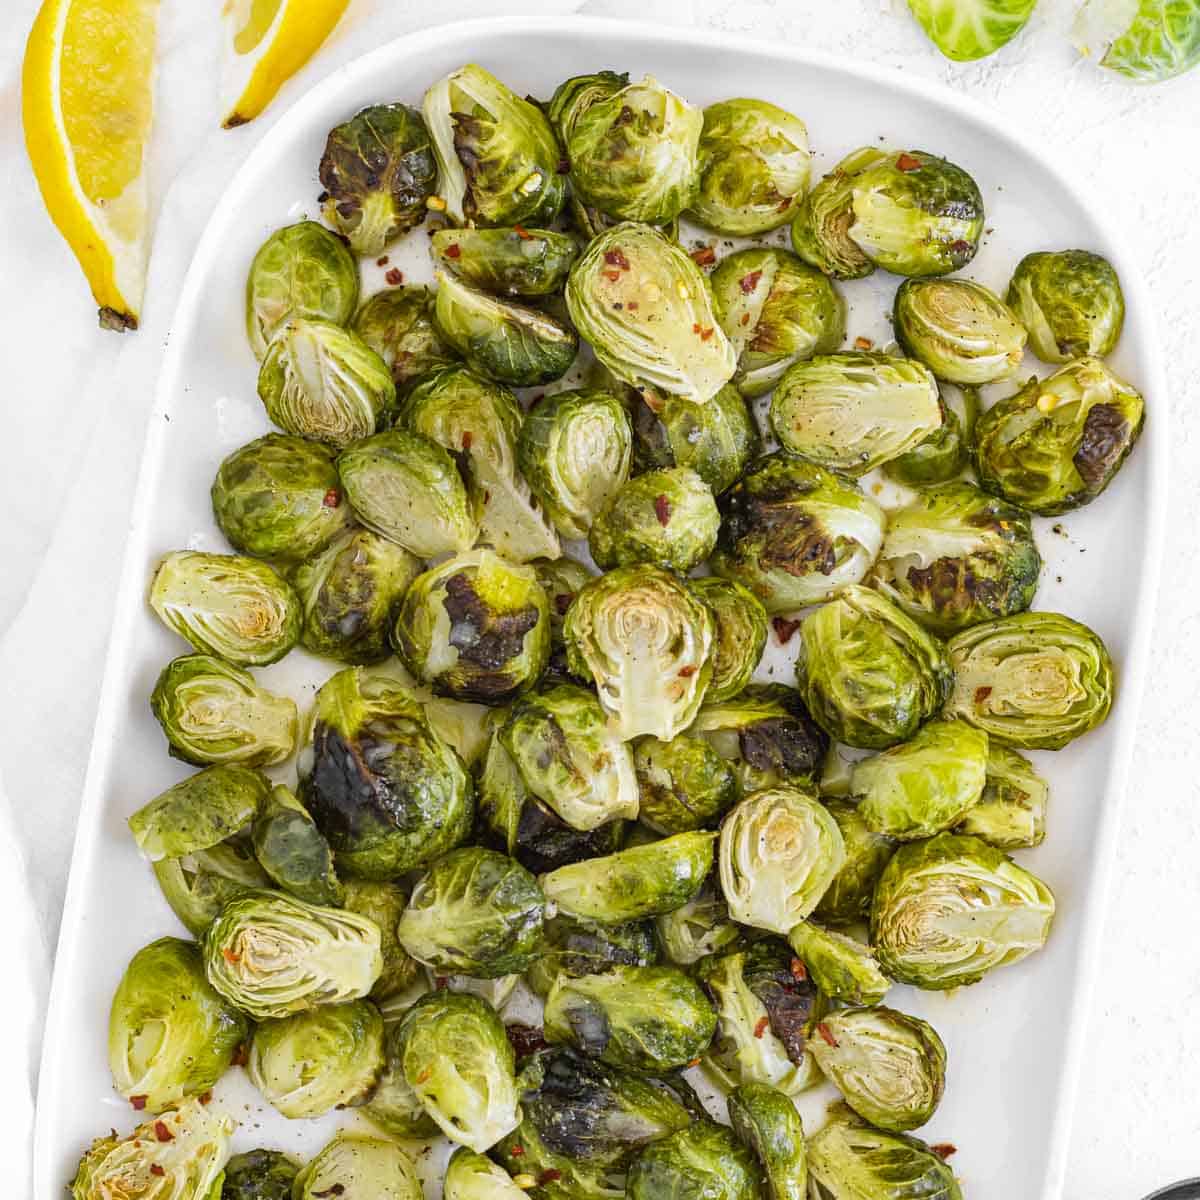 Roasted sprouts with lemon and dressing